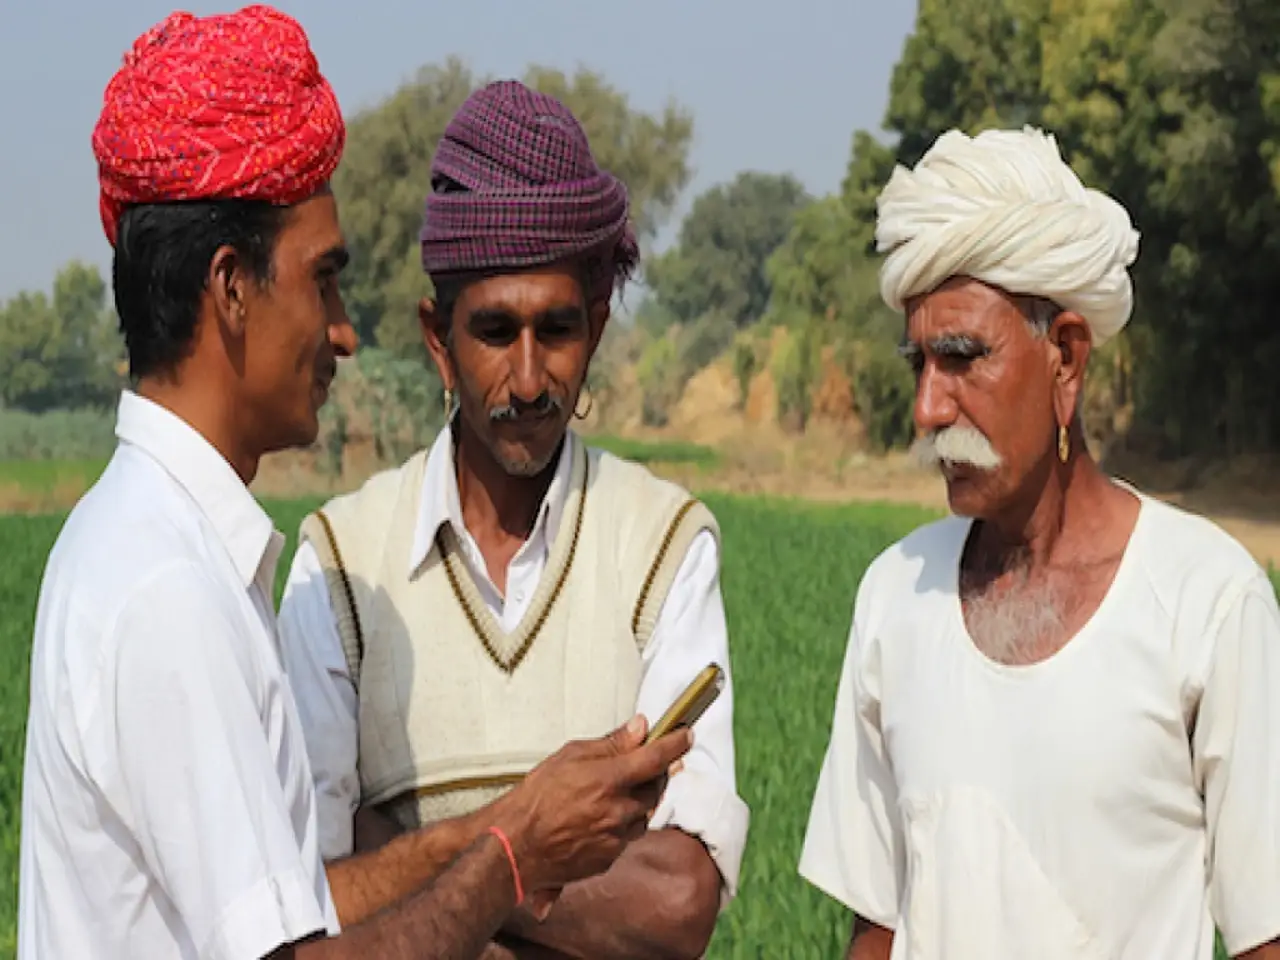 The loanee can be an individual farmer or joint/ group of farmers- owner cultivators & JLGs/SHGs engaged in agriculture & allied activities.